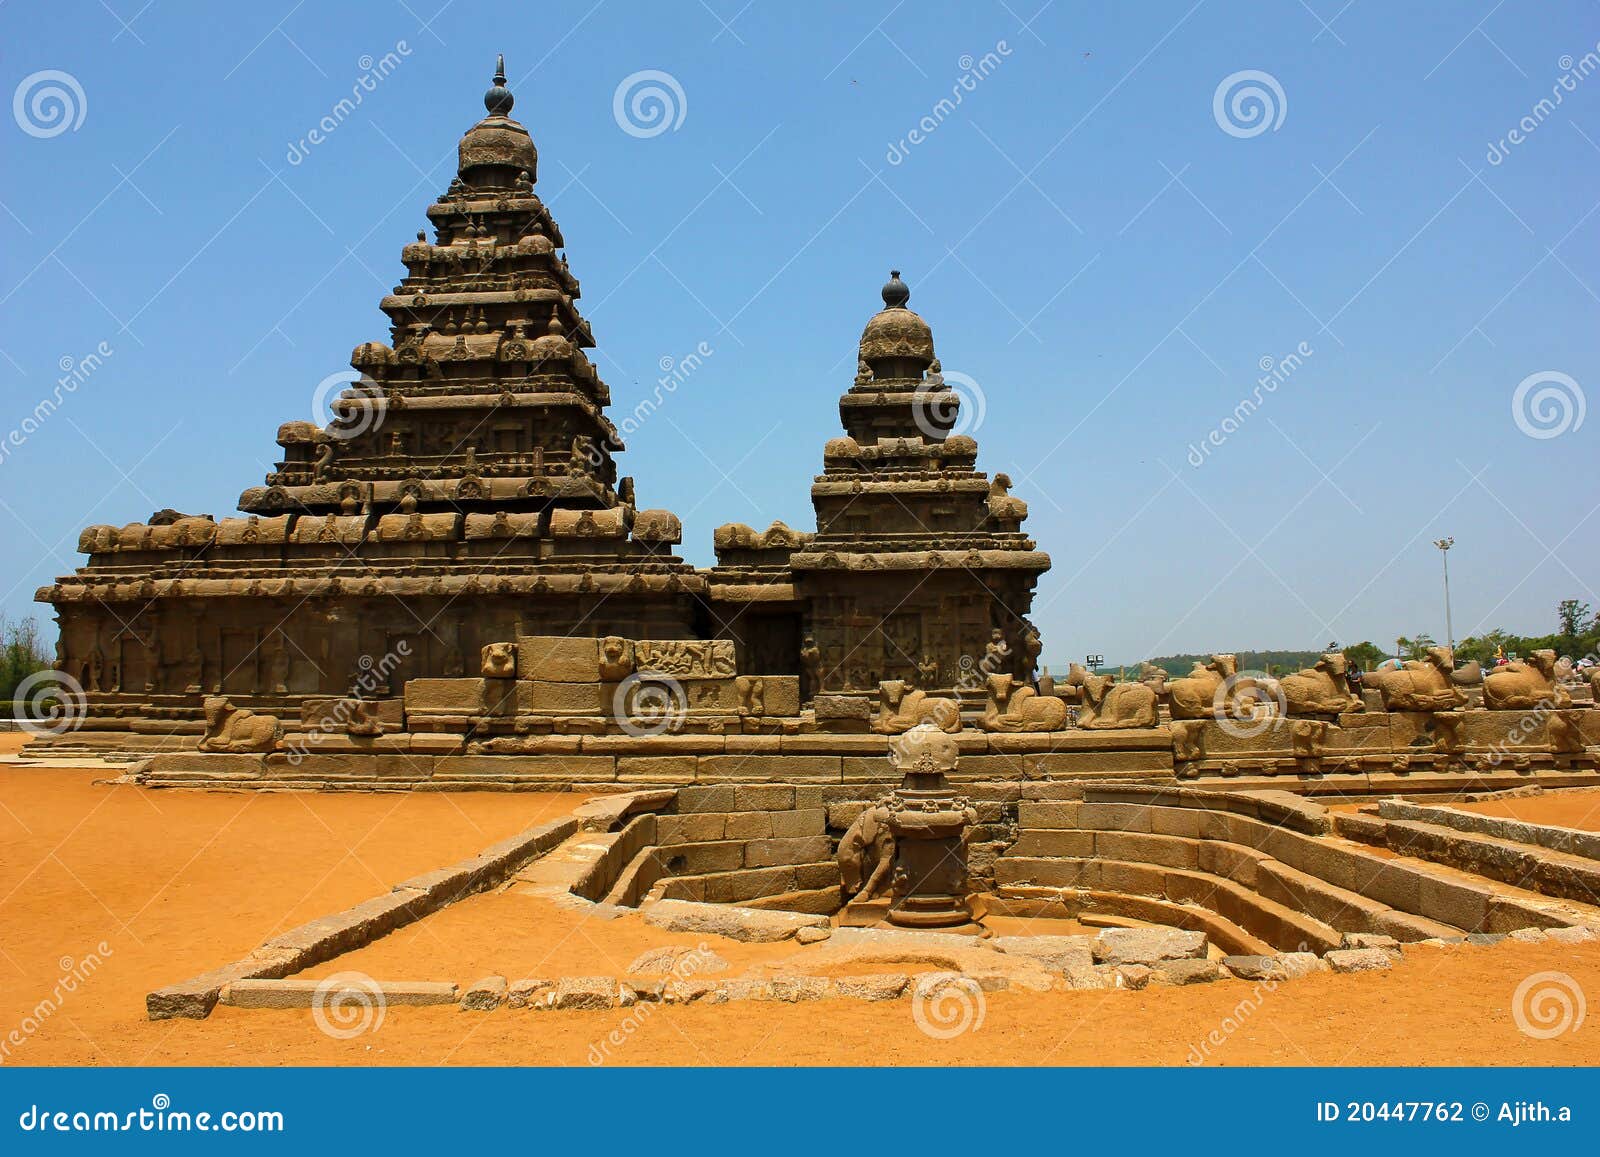 Fantastic Art Design Of Monolithic Famous Shore Temple Stock Photo   Download Image Now  iStock